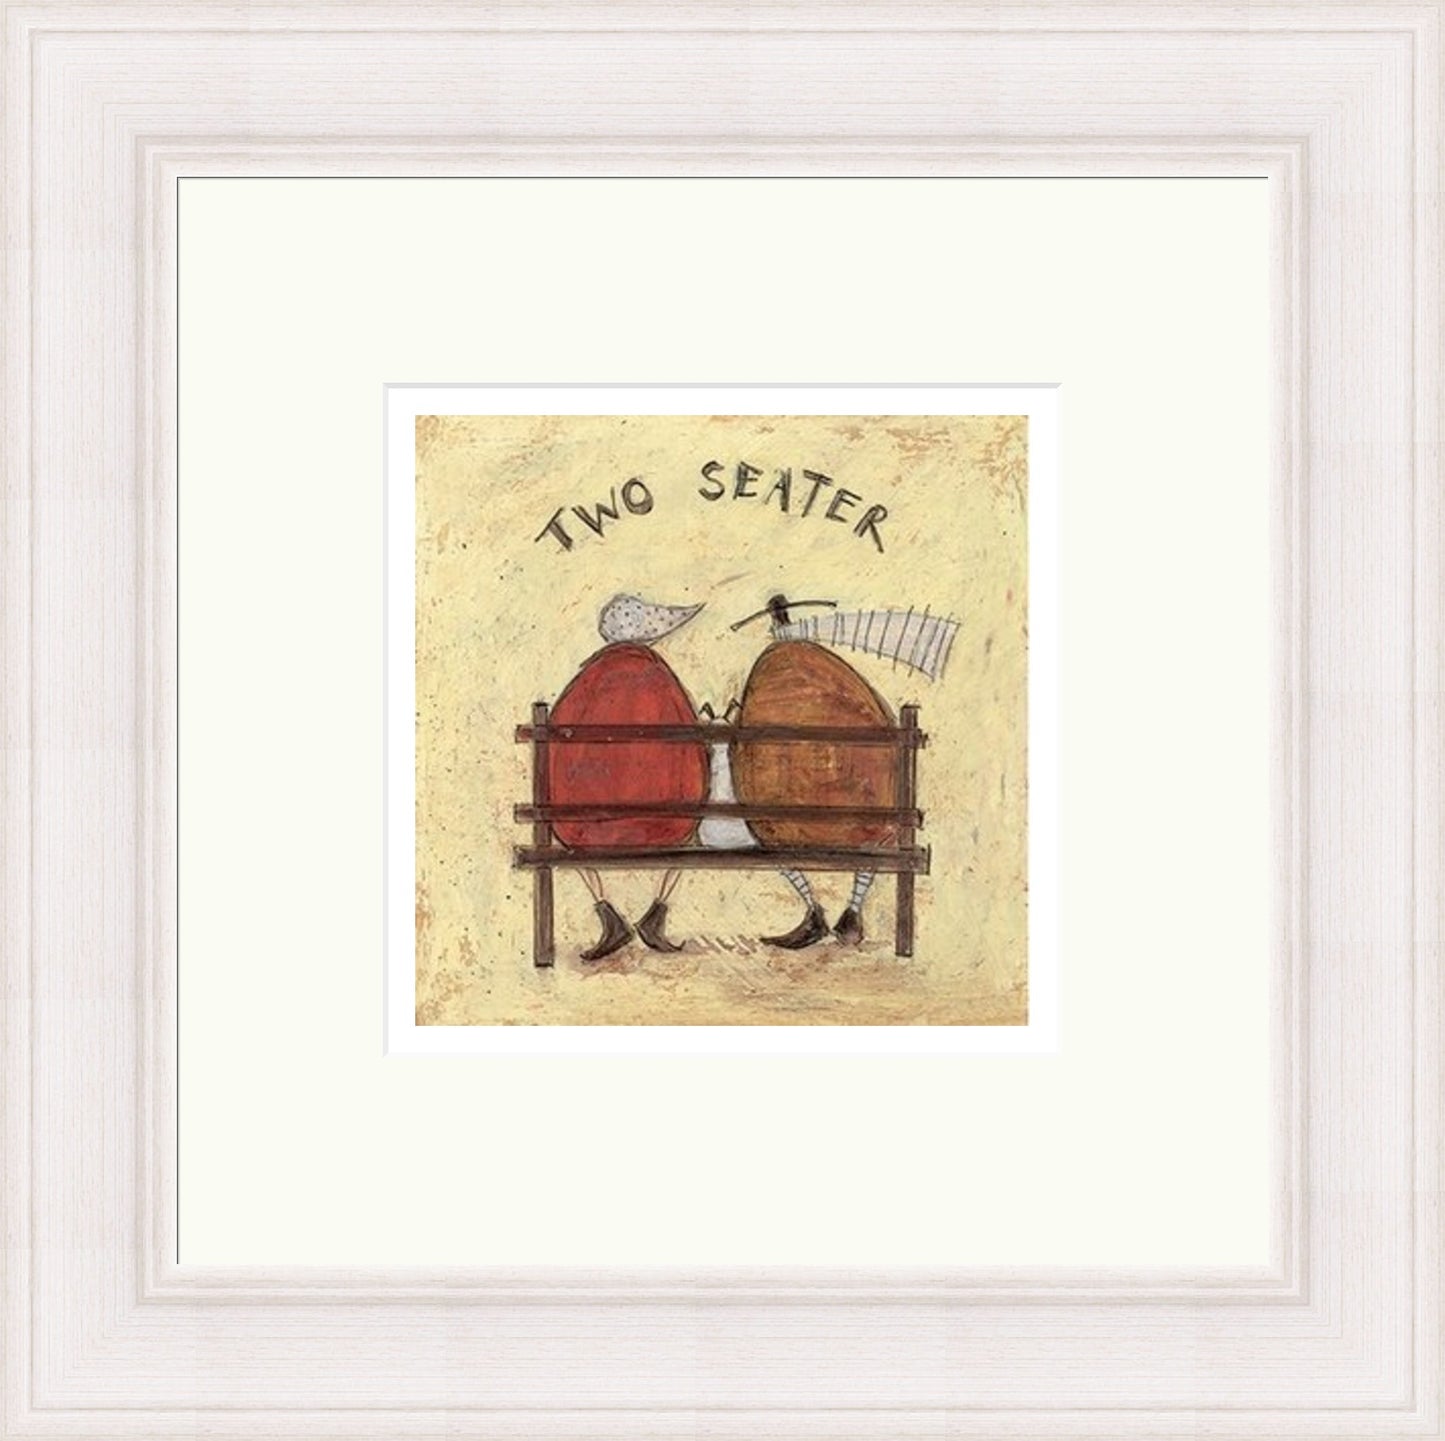 Two Seater by Sam Toft